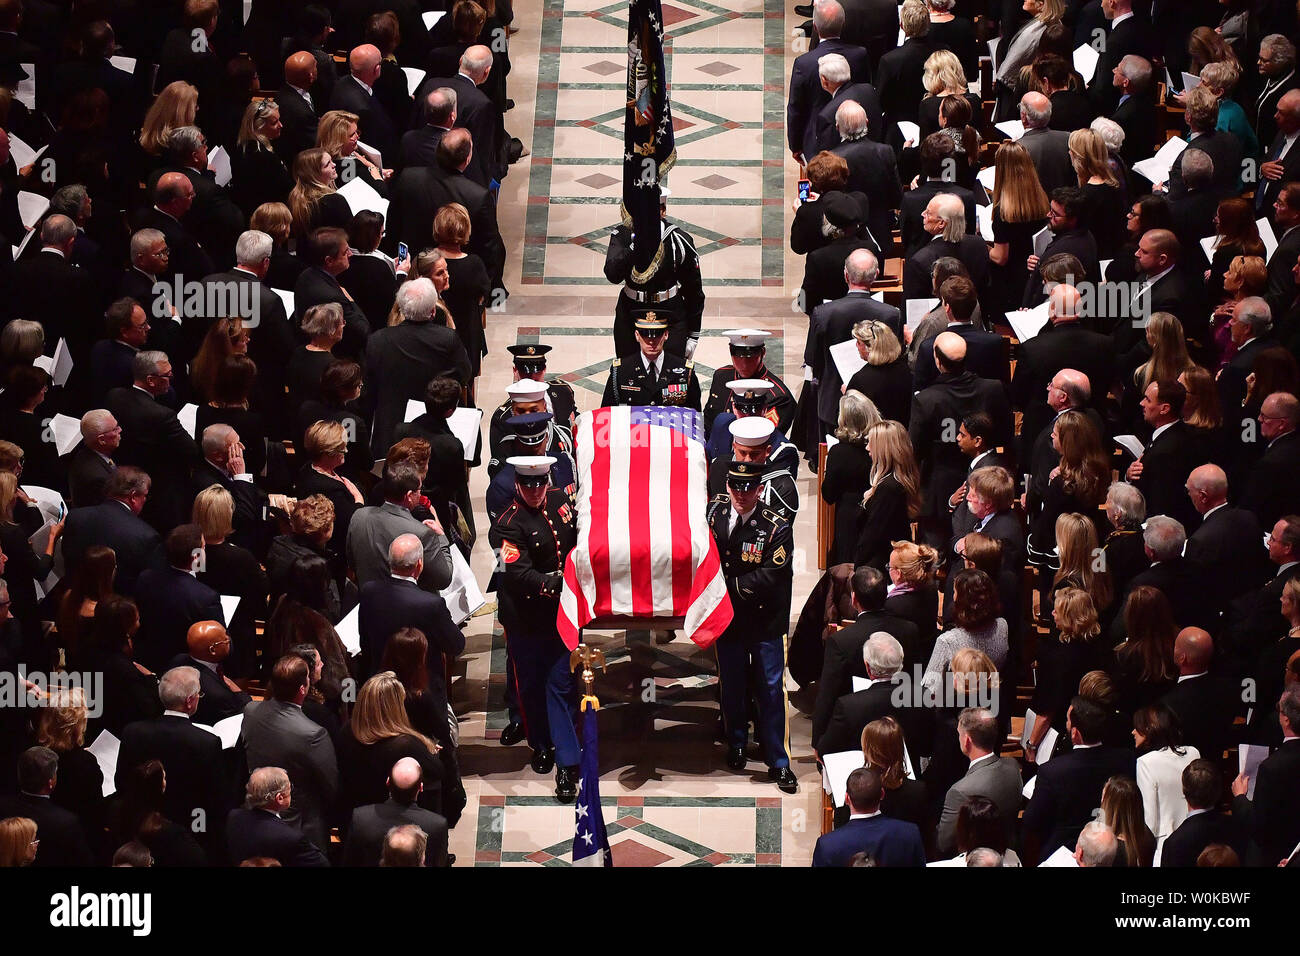 The casket containing the remains of President George H.W. Bush departs the National Cathedral following his funeral service, in Washington D.C. on December 5, 2018. Photo by Kevin Dietsch/UPI Stock Photo